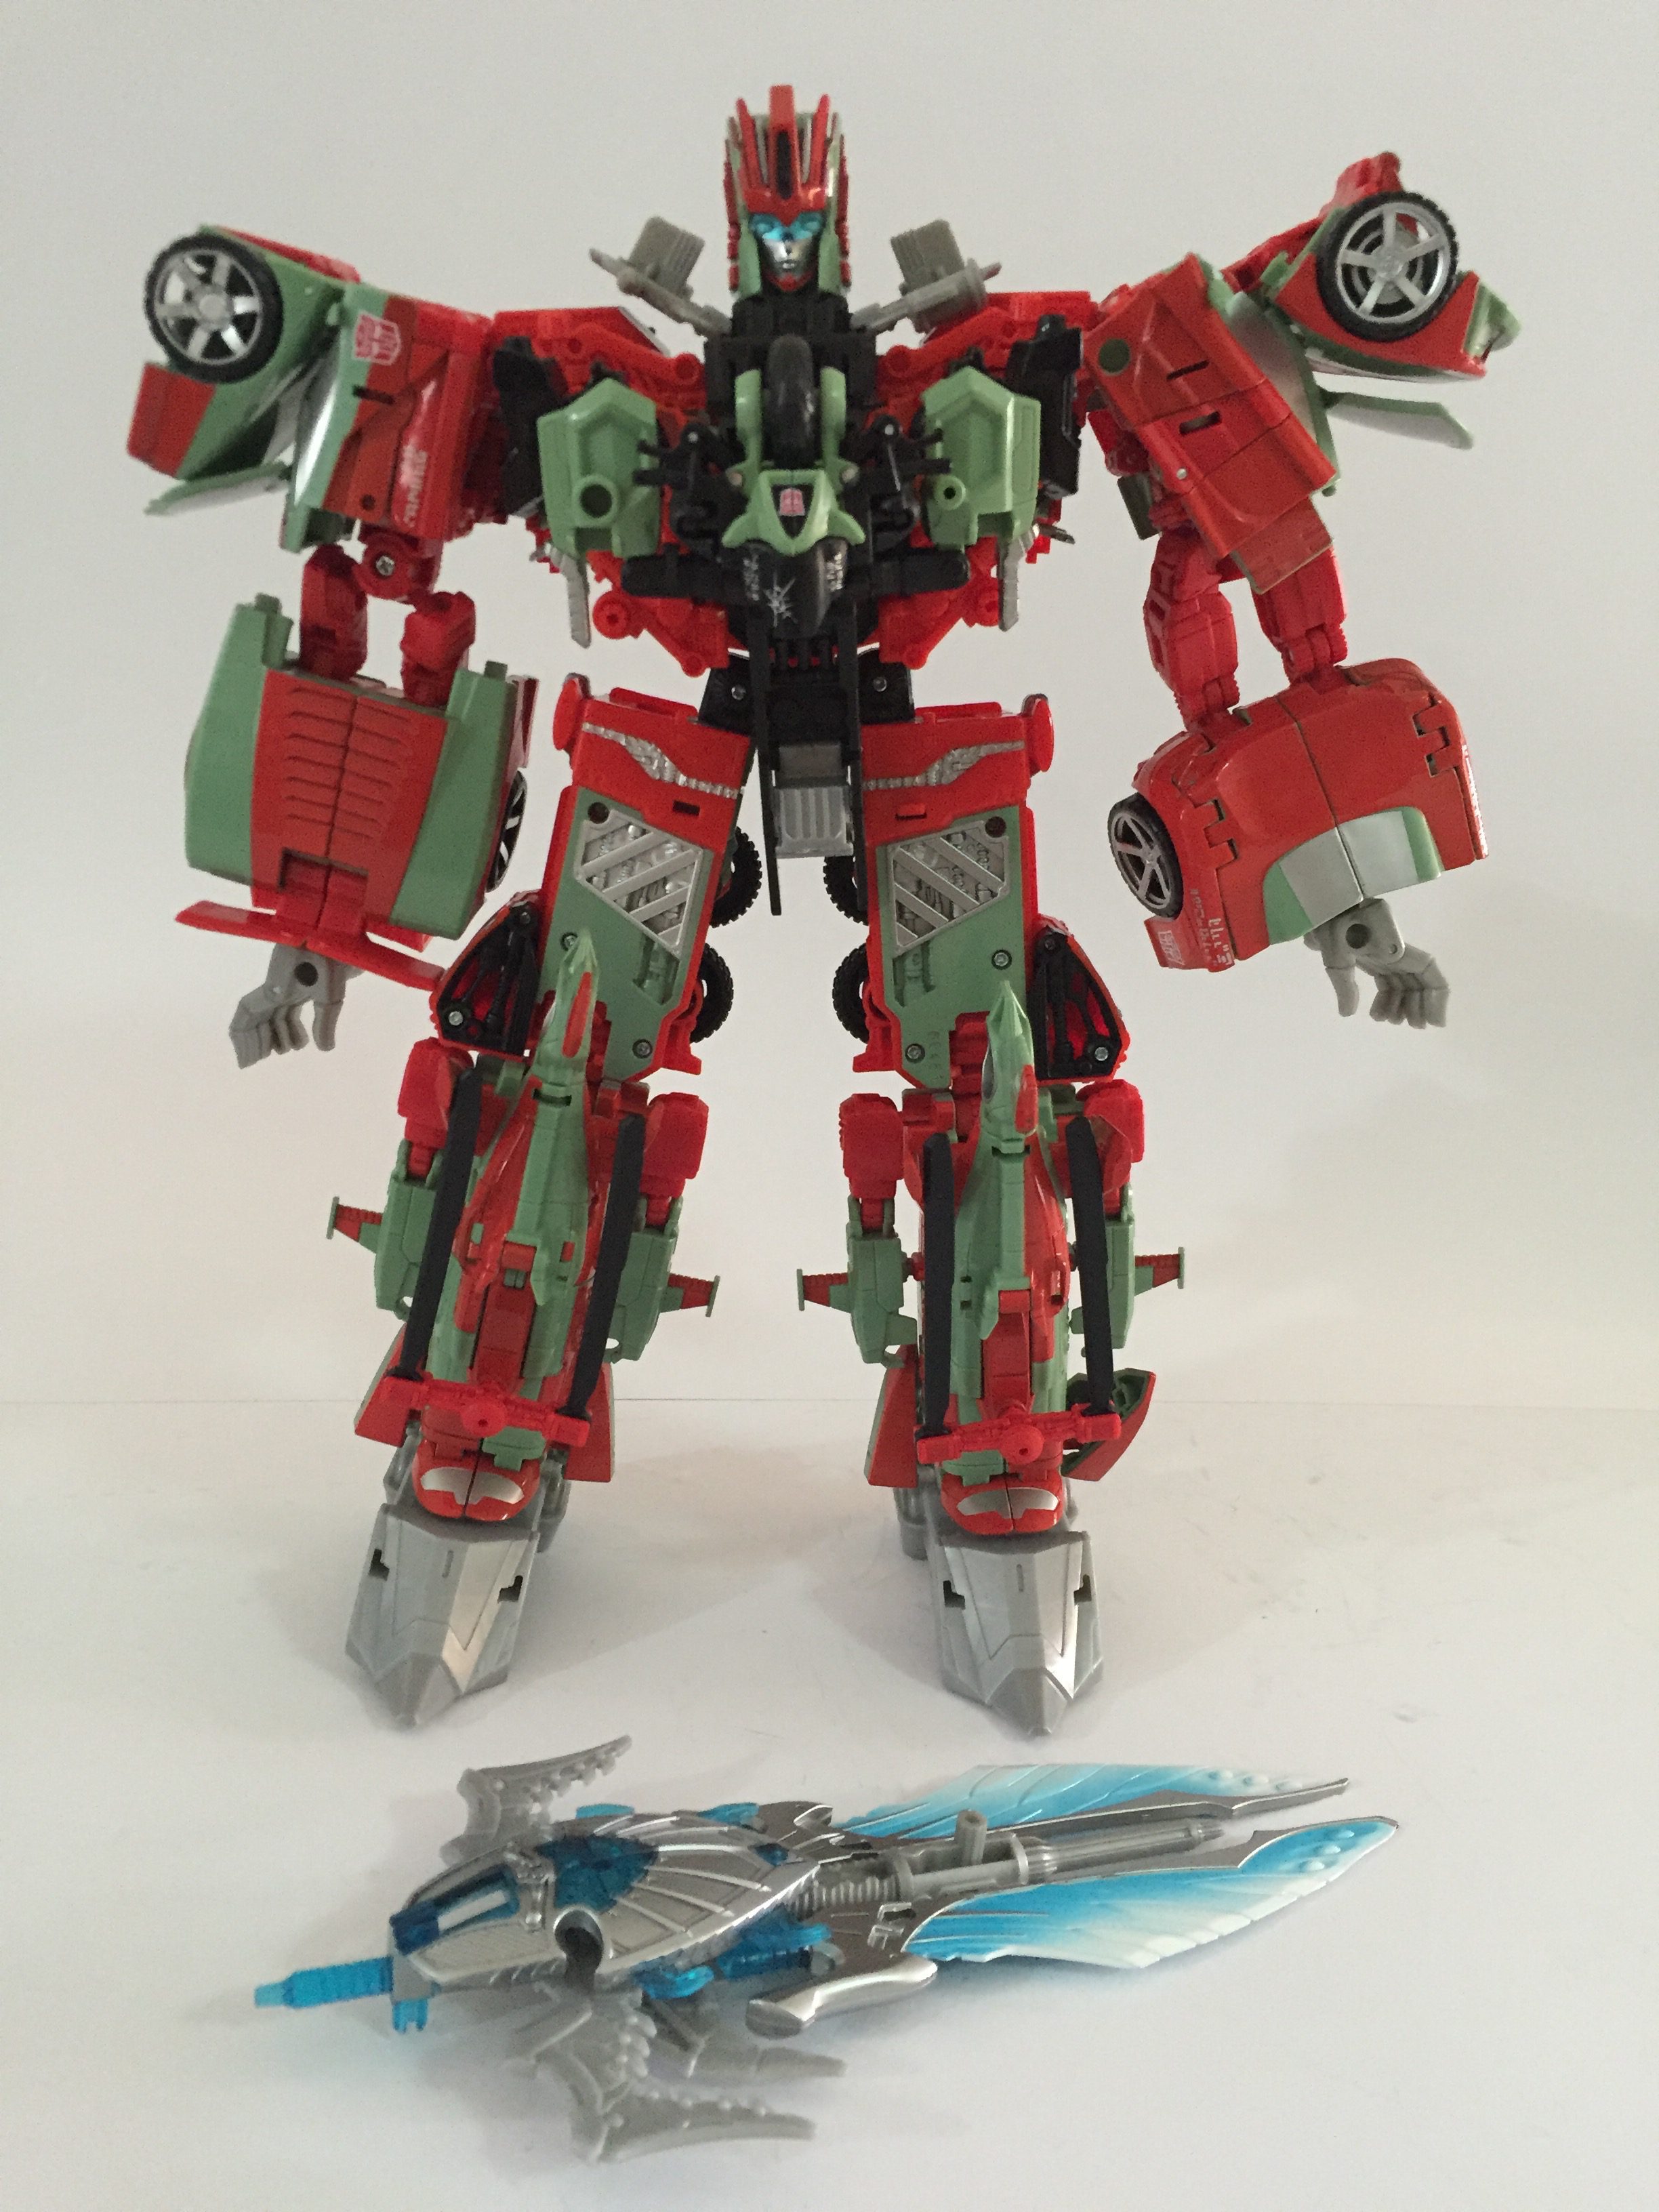 Victorion and her sword. (Victorion)